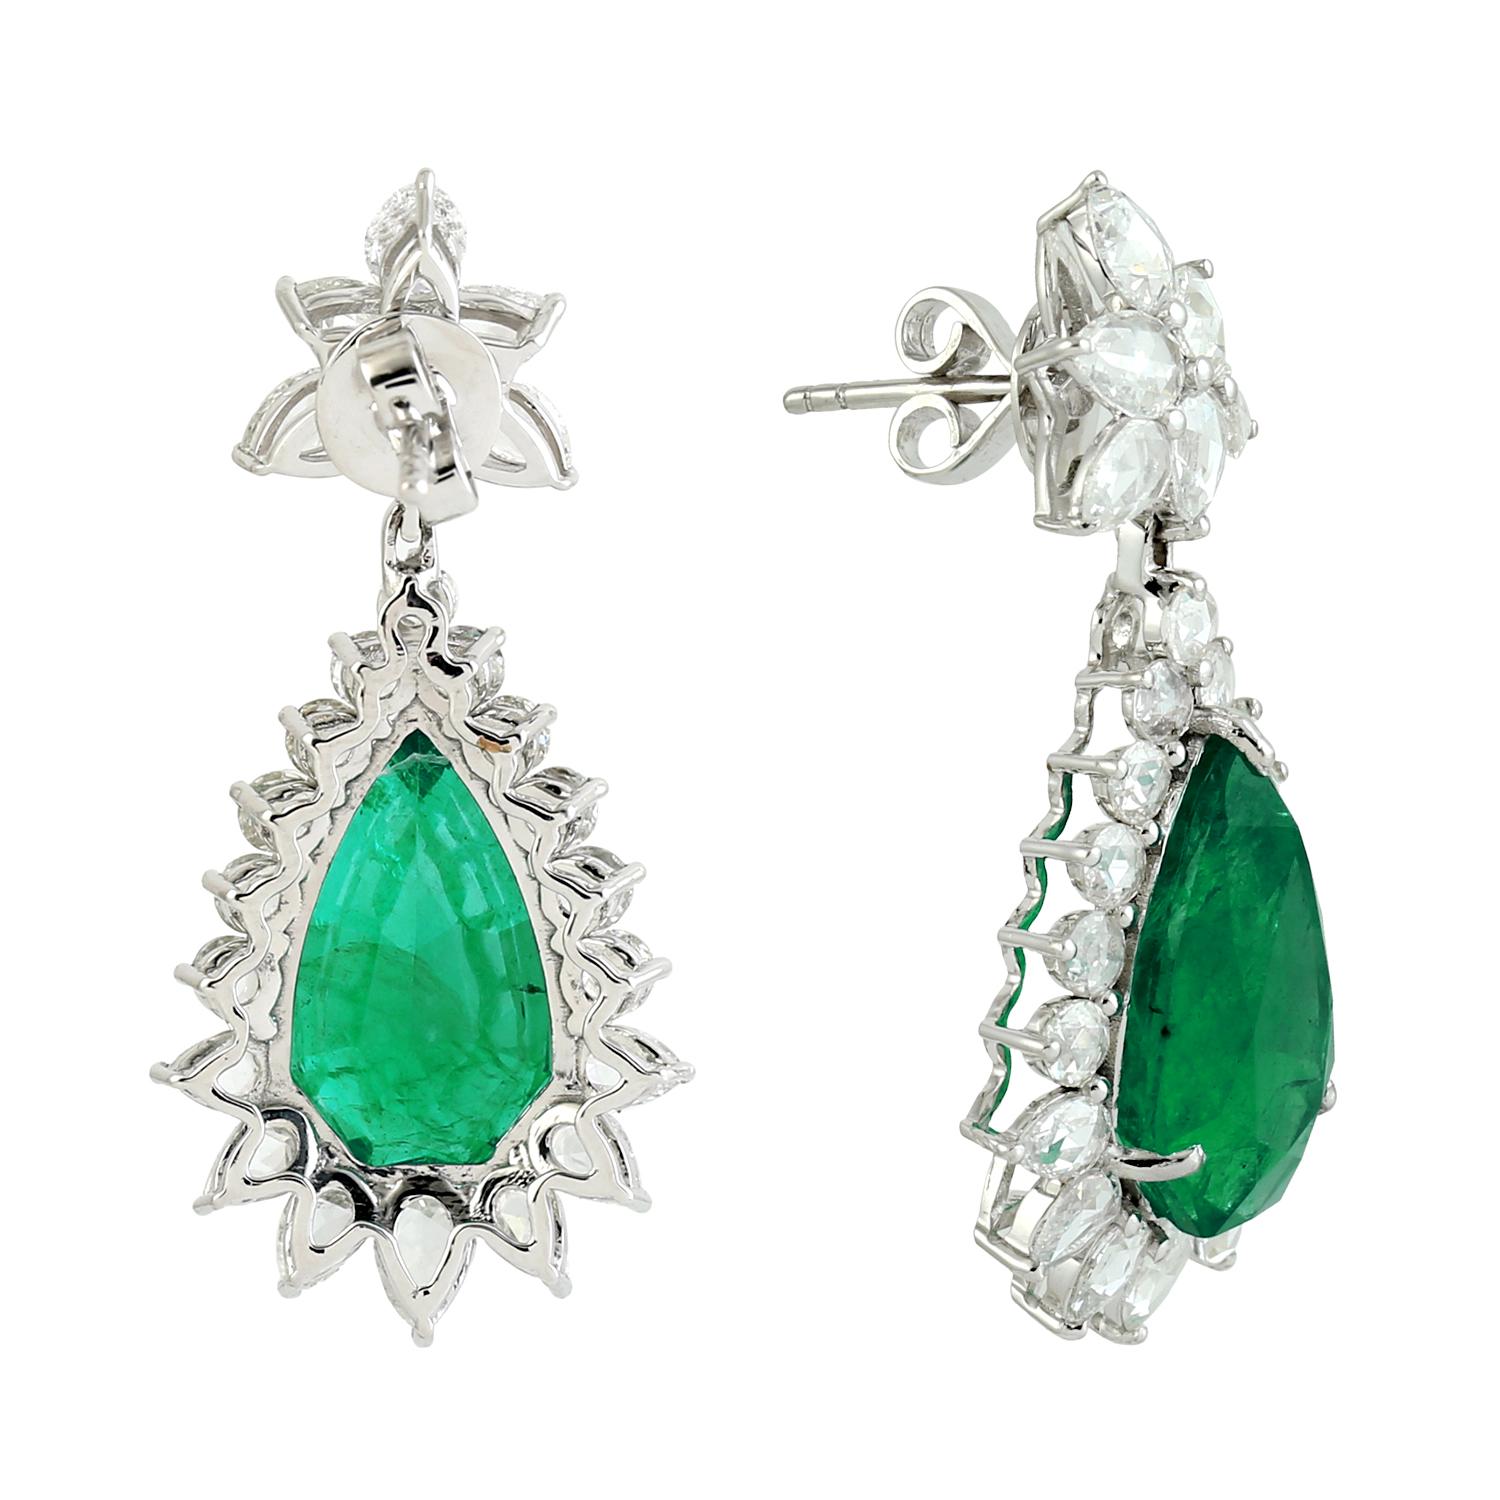 Mixed Cut 14.80ct Pear Shaped Emerald Dangle Earrings With Diamonds Made In 18k Gold For Sale